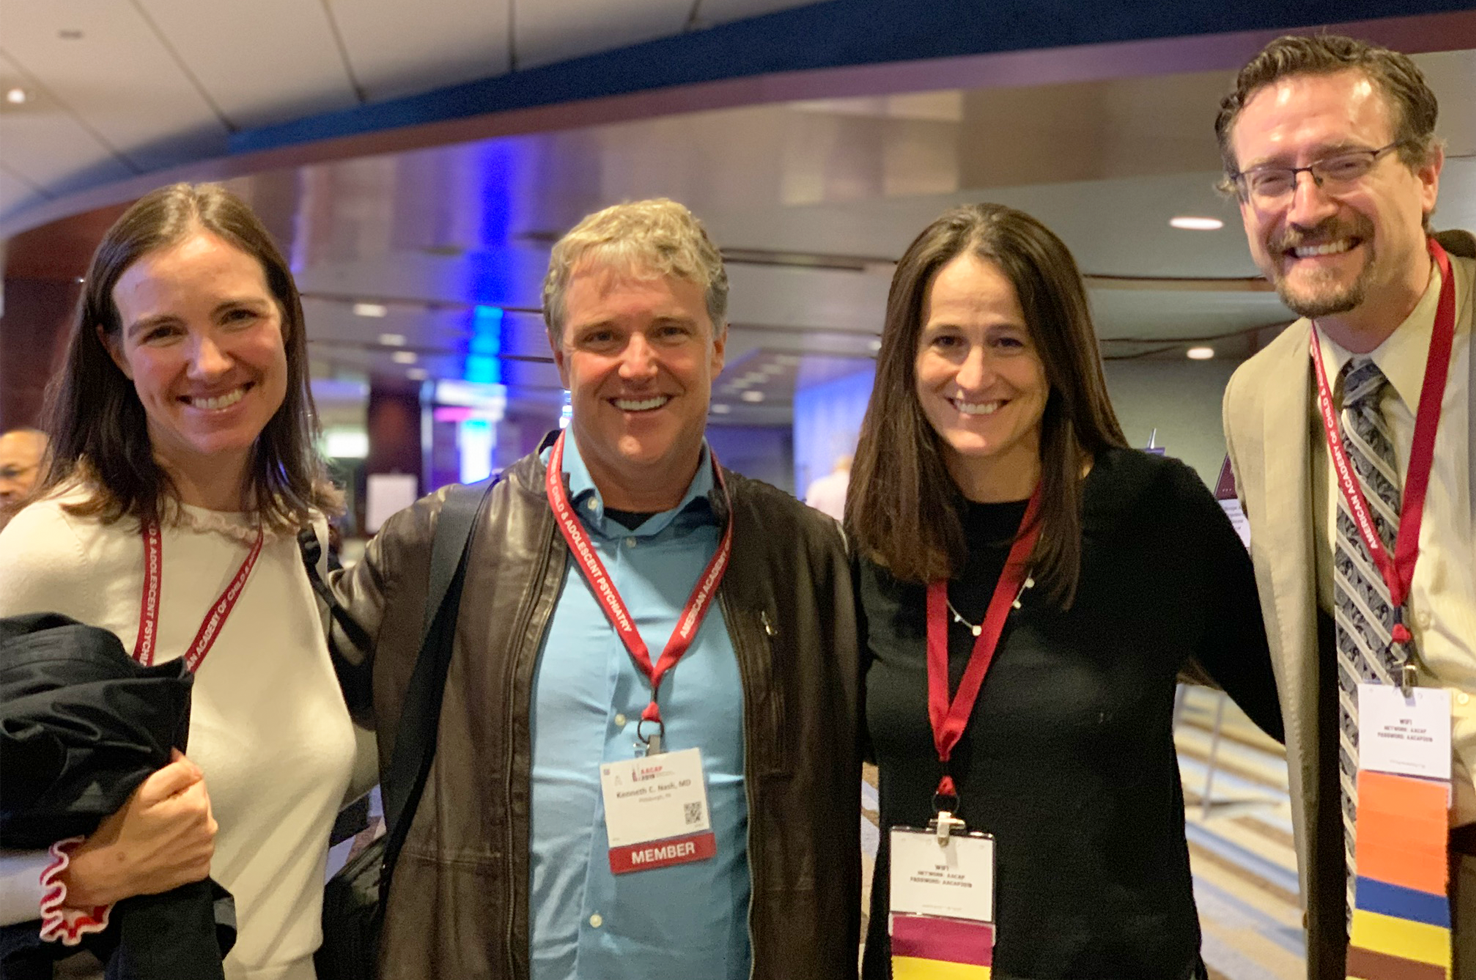 Pitt Psychiatry Turns Out at 2019 AACAP Meeting